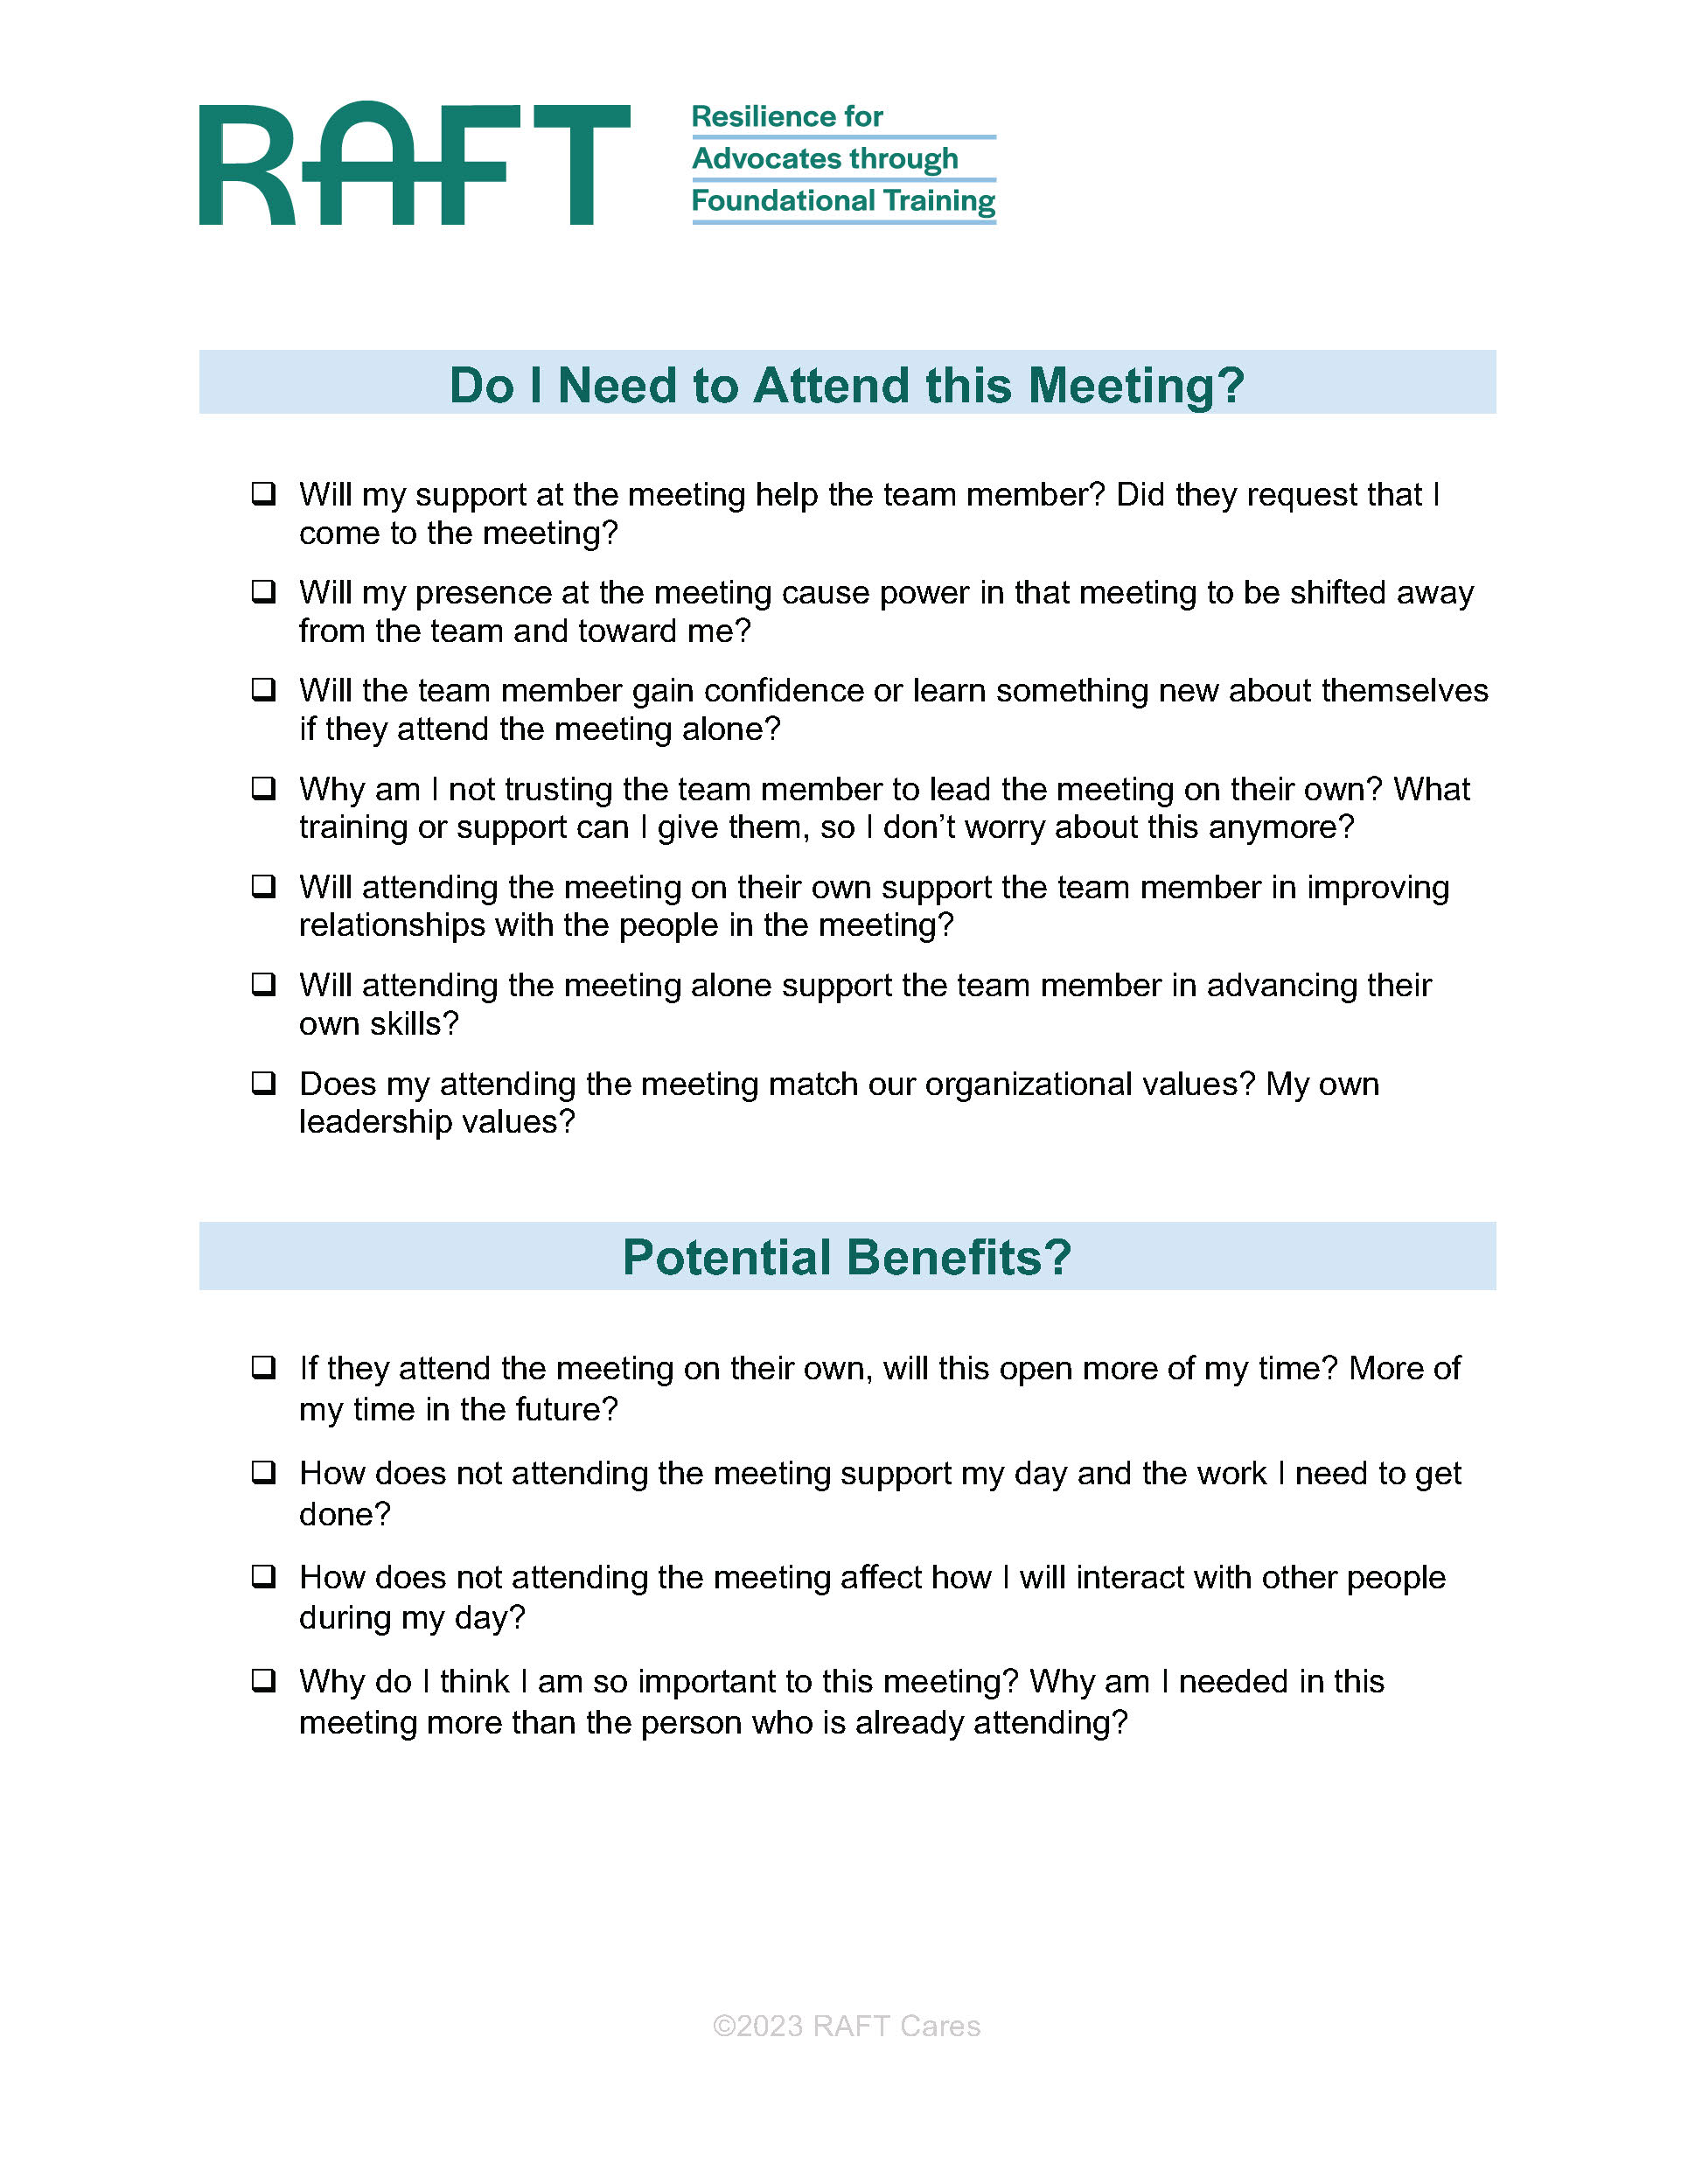 Do I Need to Attend This Meeting? Leadership Checklist